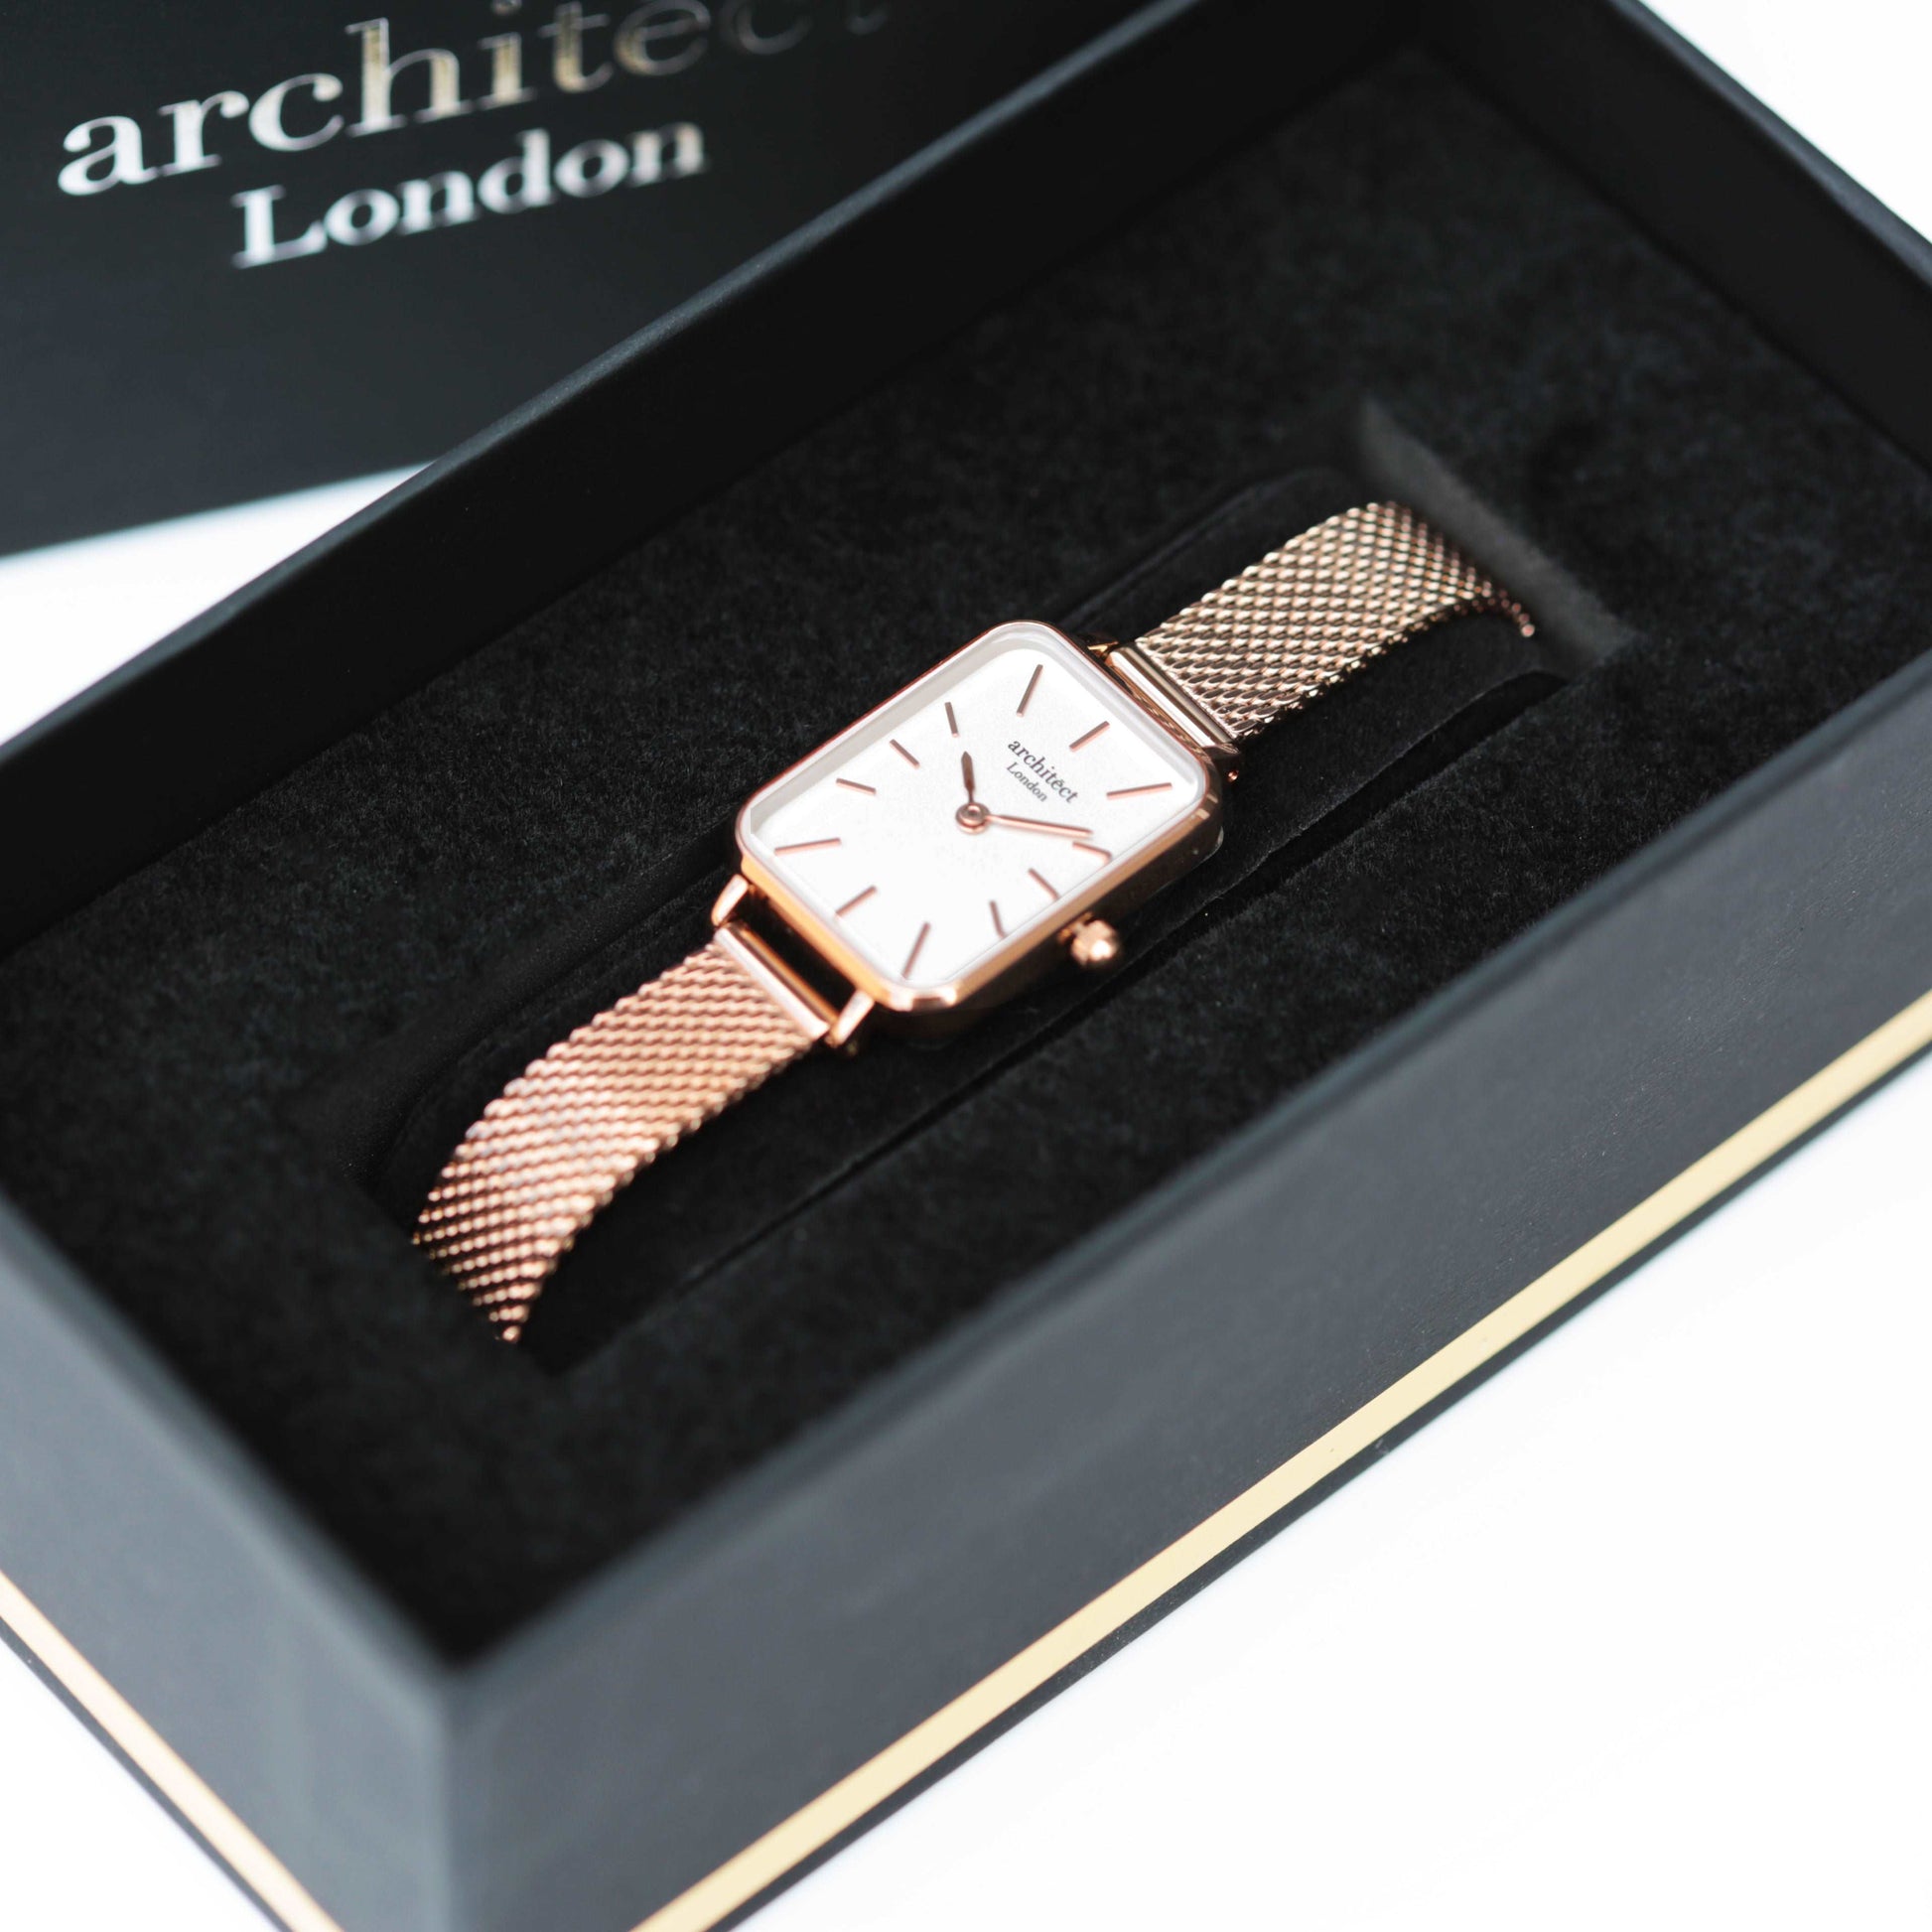 Personalized Ladies' Watches - Architēct Lille Engraved Watch in Rose Gold 